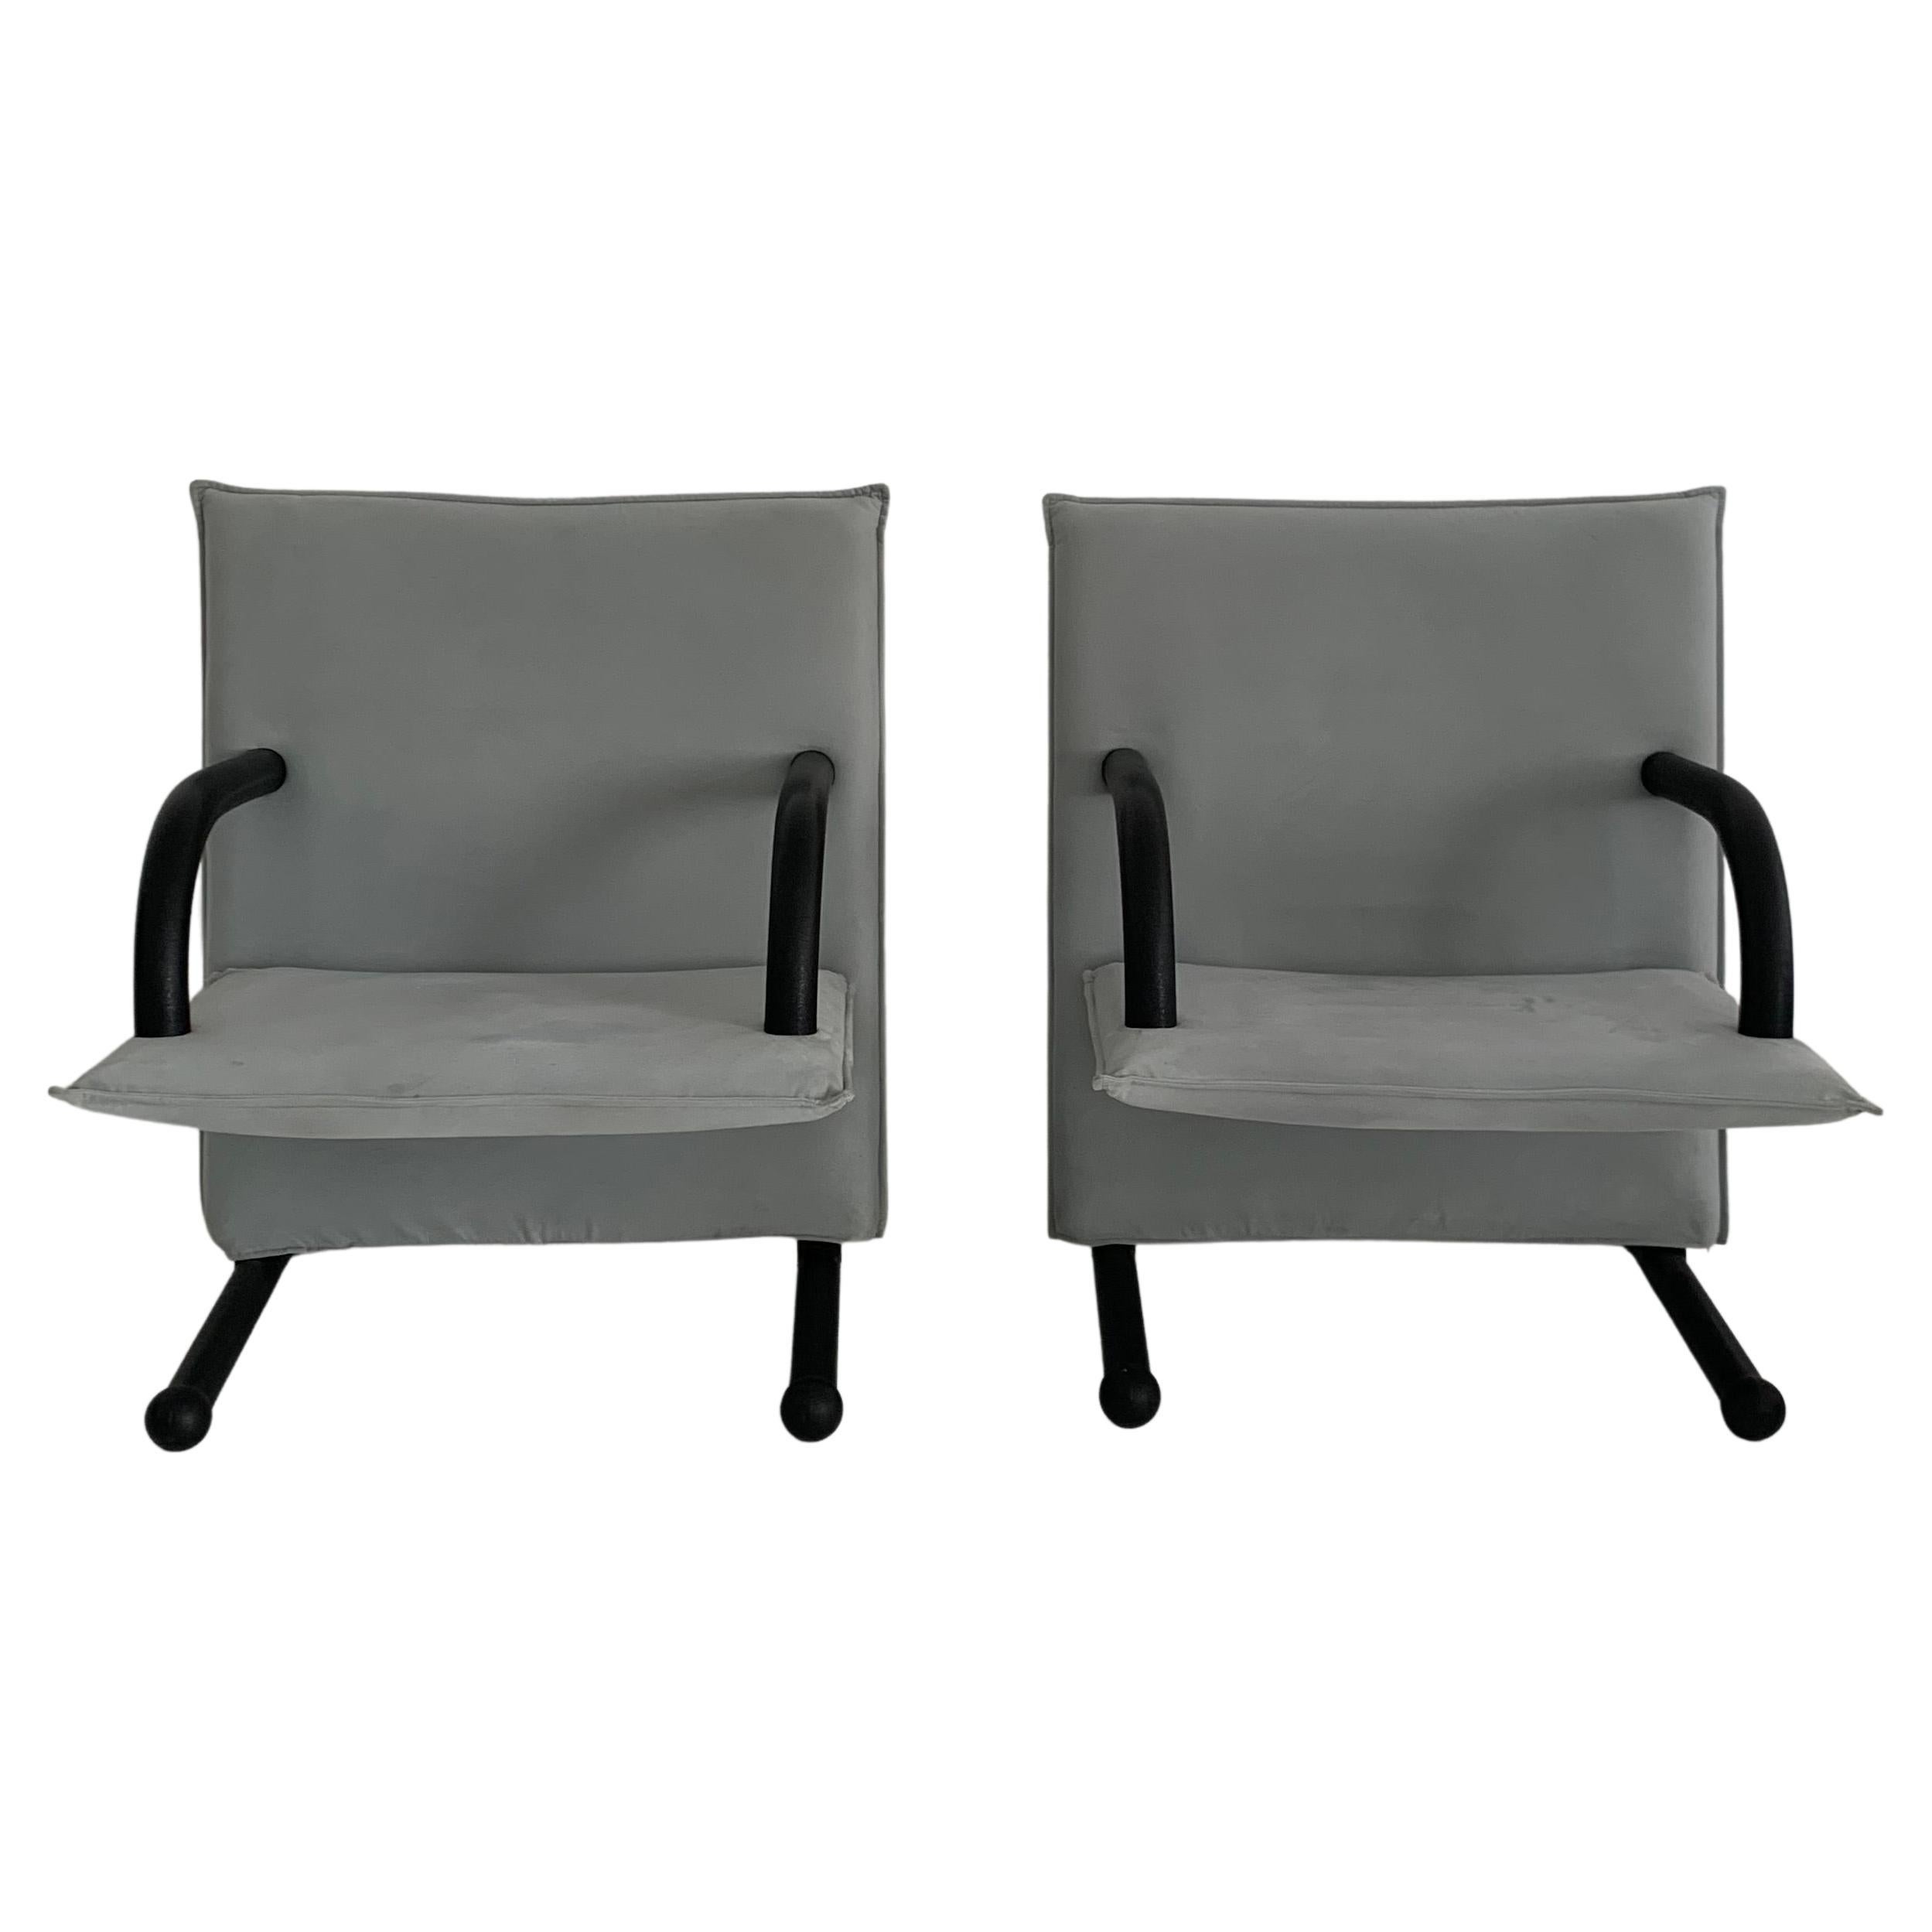 Set of 2 Lounge Chairs Burkhard Vogtherr for Arflex T-Line, 1980’s